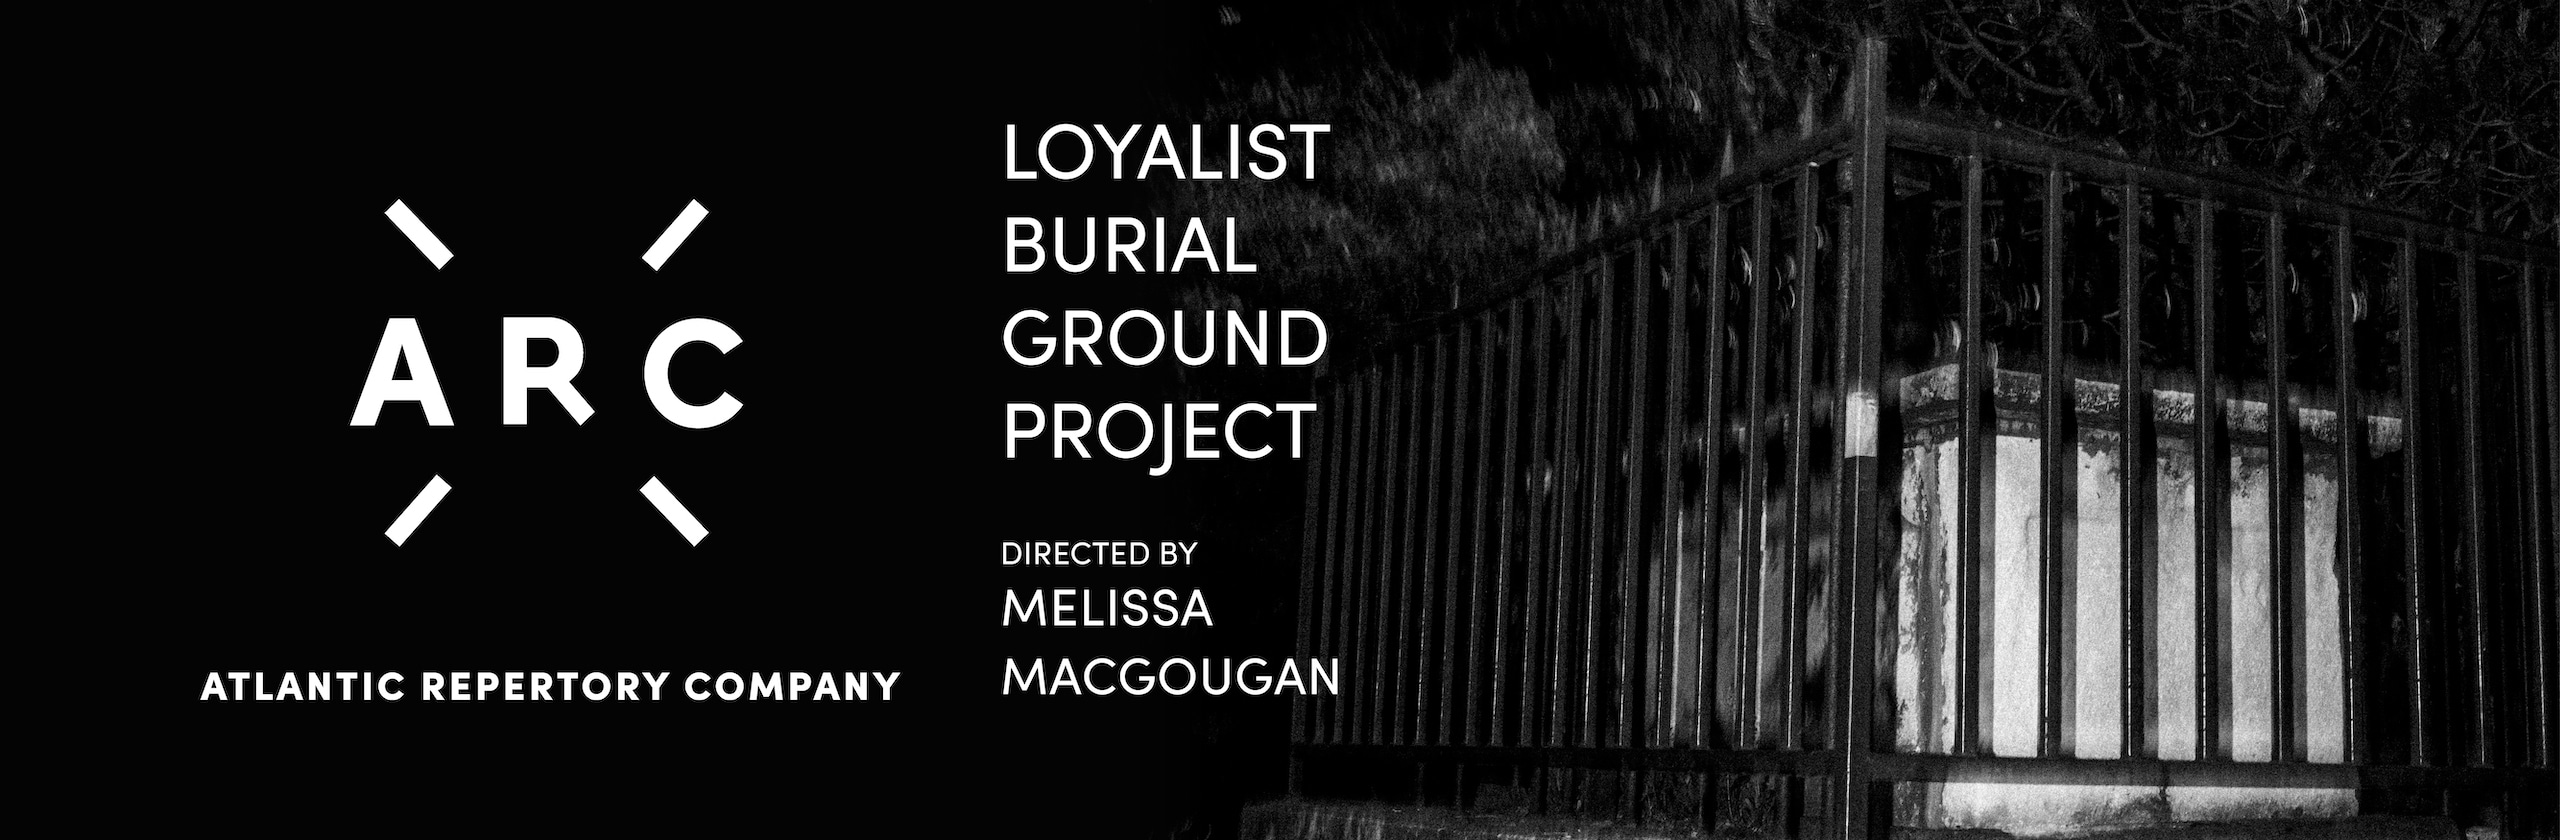 The Loyalist Burial Ground Project